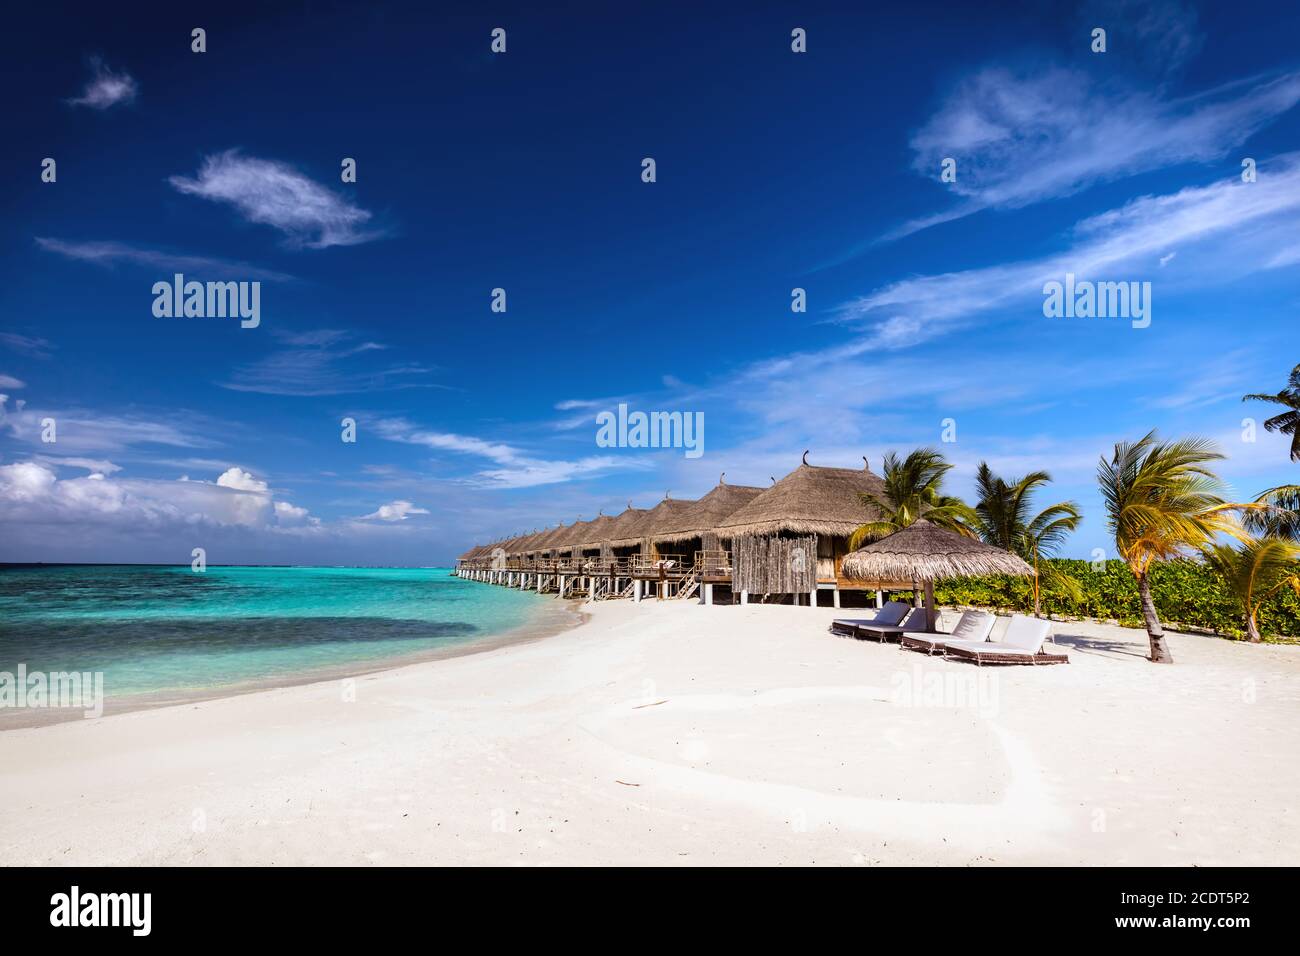 Beach and water villas on a small island resort in Maldives, Indian Ocean. Stock Photo